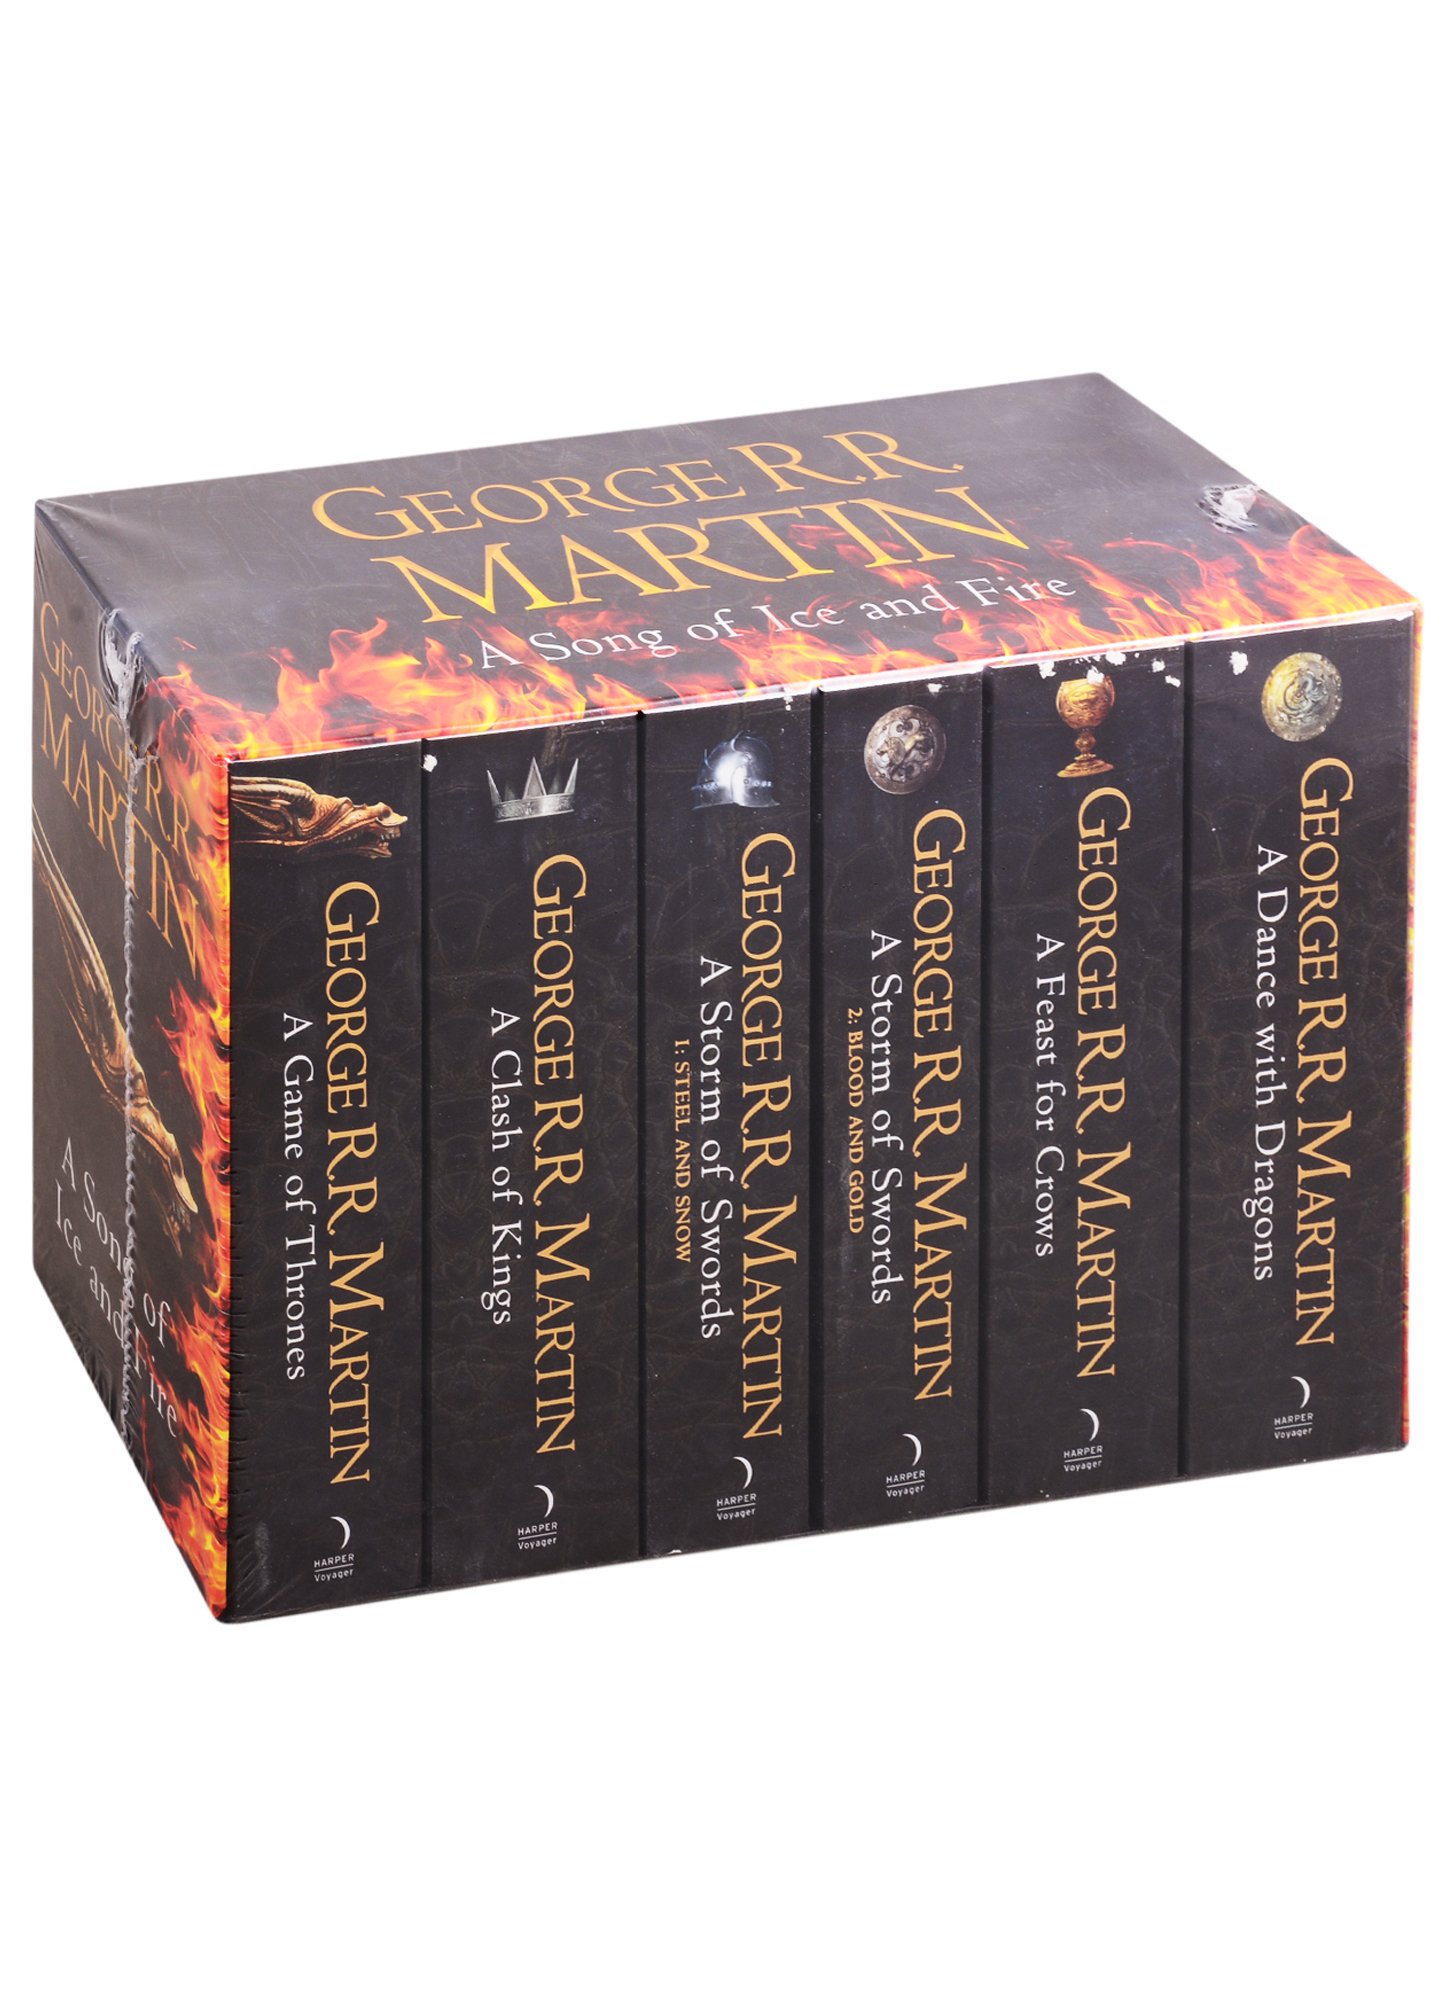 Martin George Raymond Richard Song of Ice and Fire-Game of Thrones: The complete box set of all 6 books Martin George R. R. martin george r r a dance with dragons part 2 after the feast